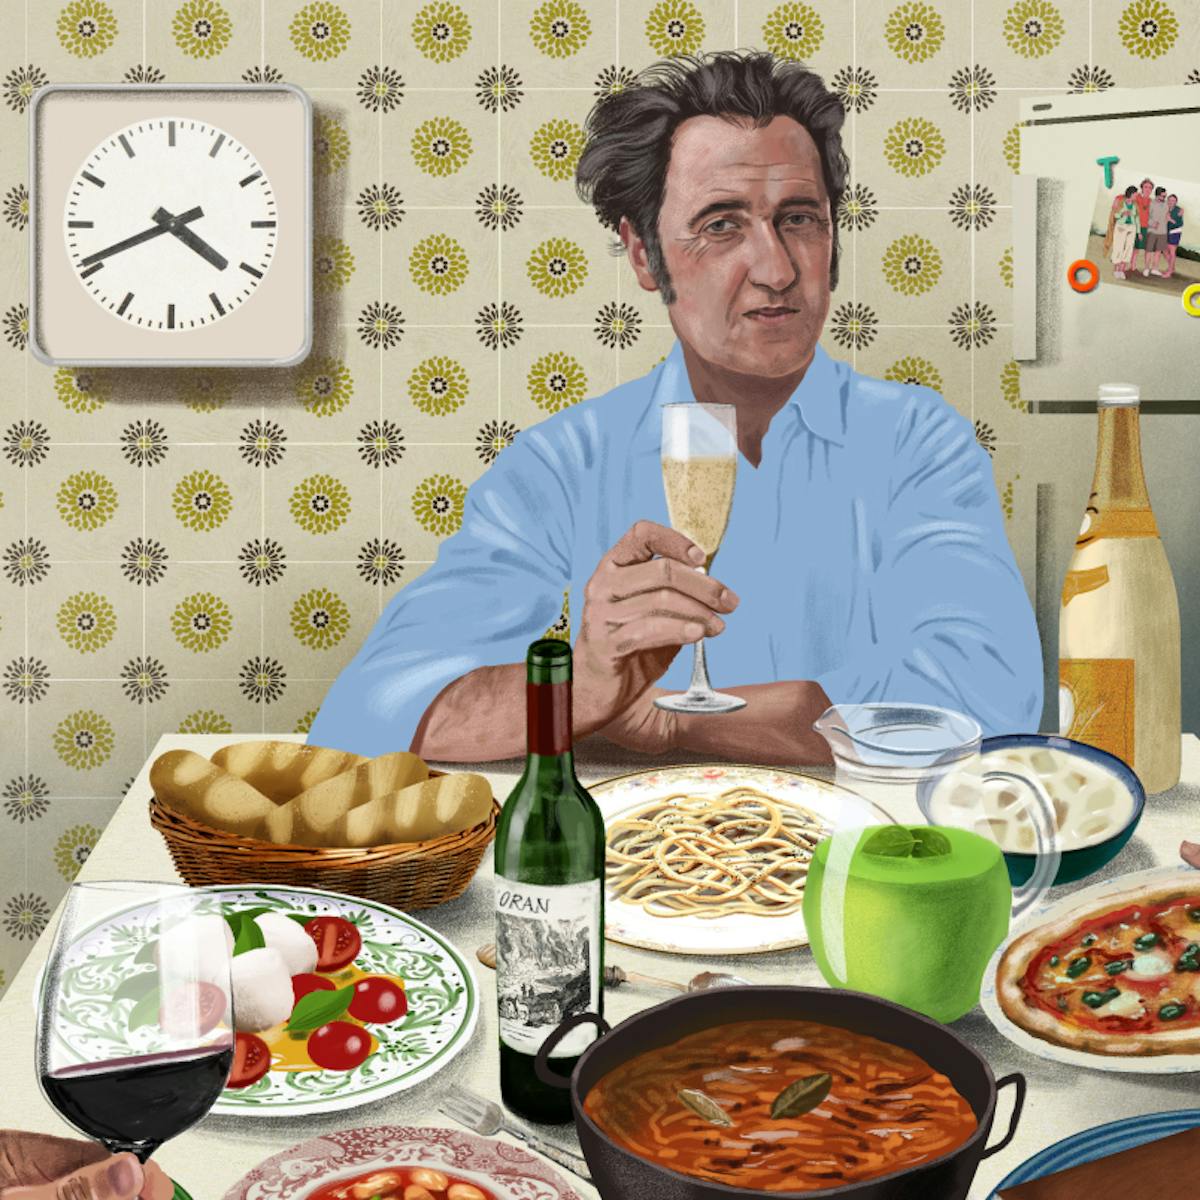 Paolo Sorrentino wears a blue shirt and sits at a table. In front of him is pizza, burrata and tomatoes, pasta, bread, red wine, and Cristal.